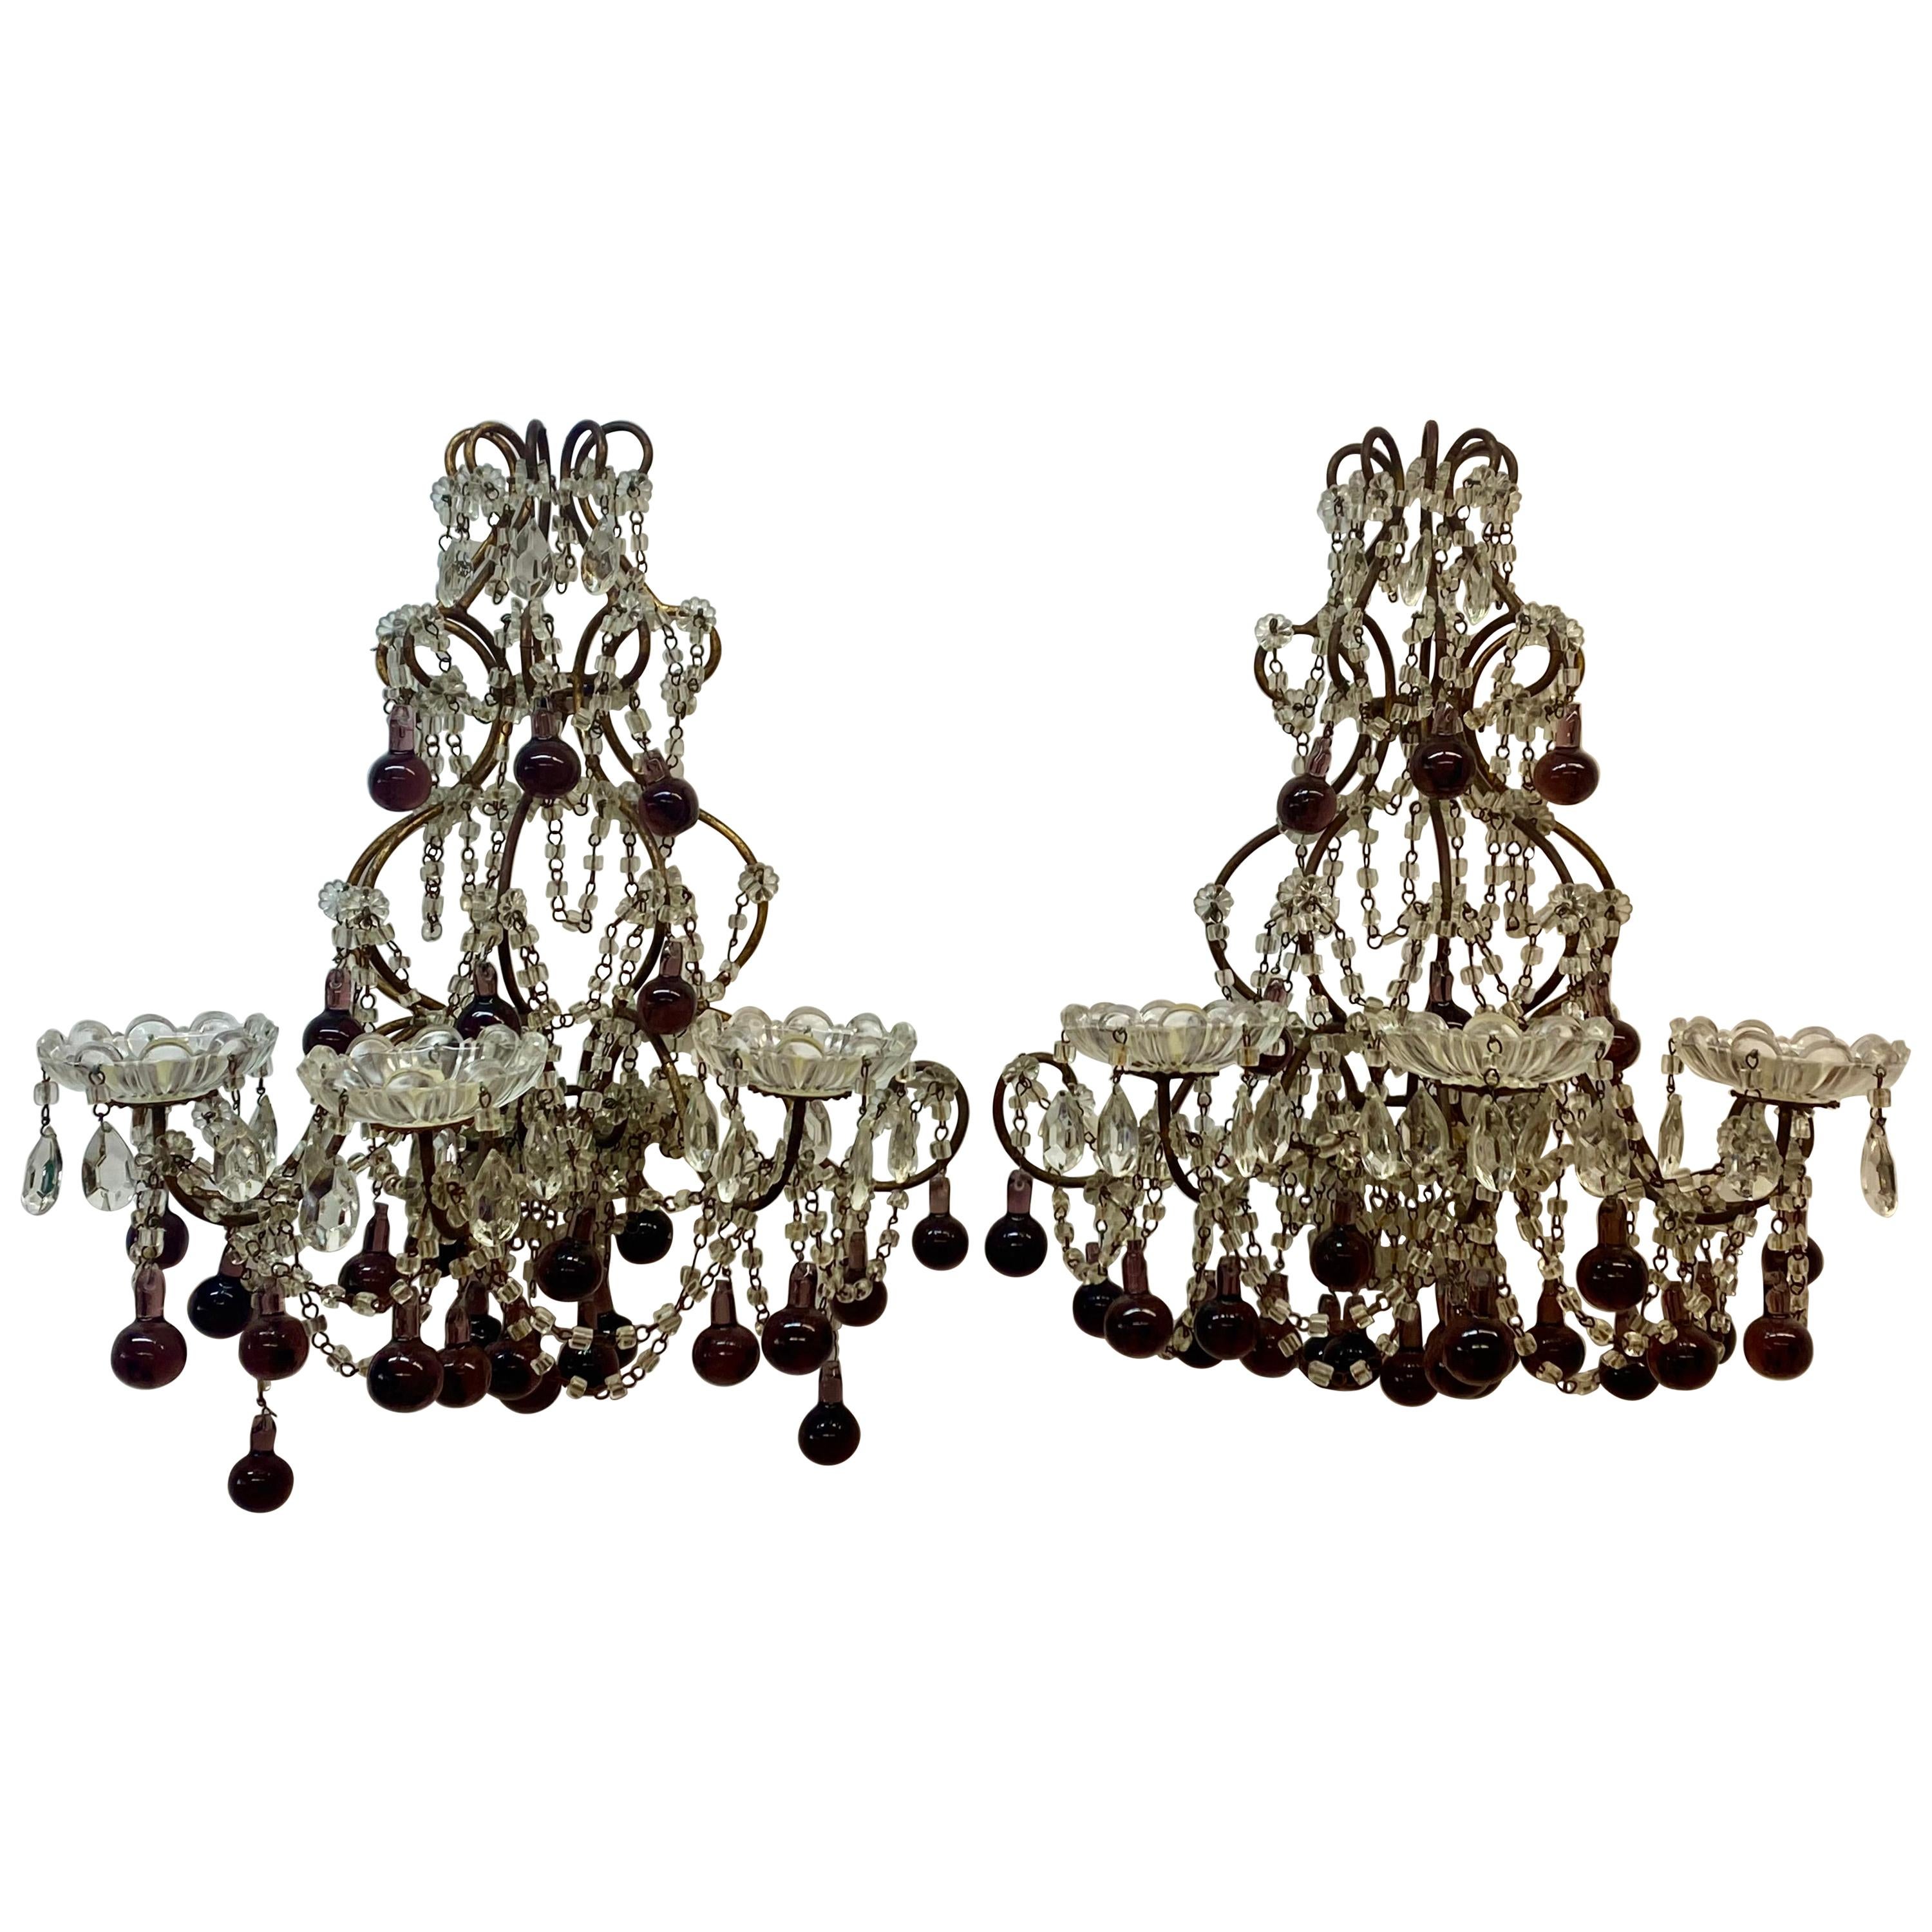 Vintage Wrought Iron, Crystal & Glass Wall Sconces, c.1930 For Sale